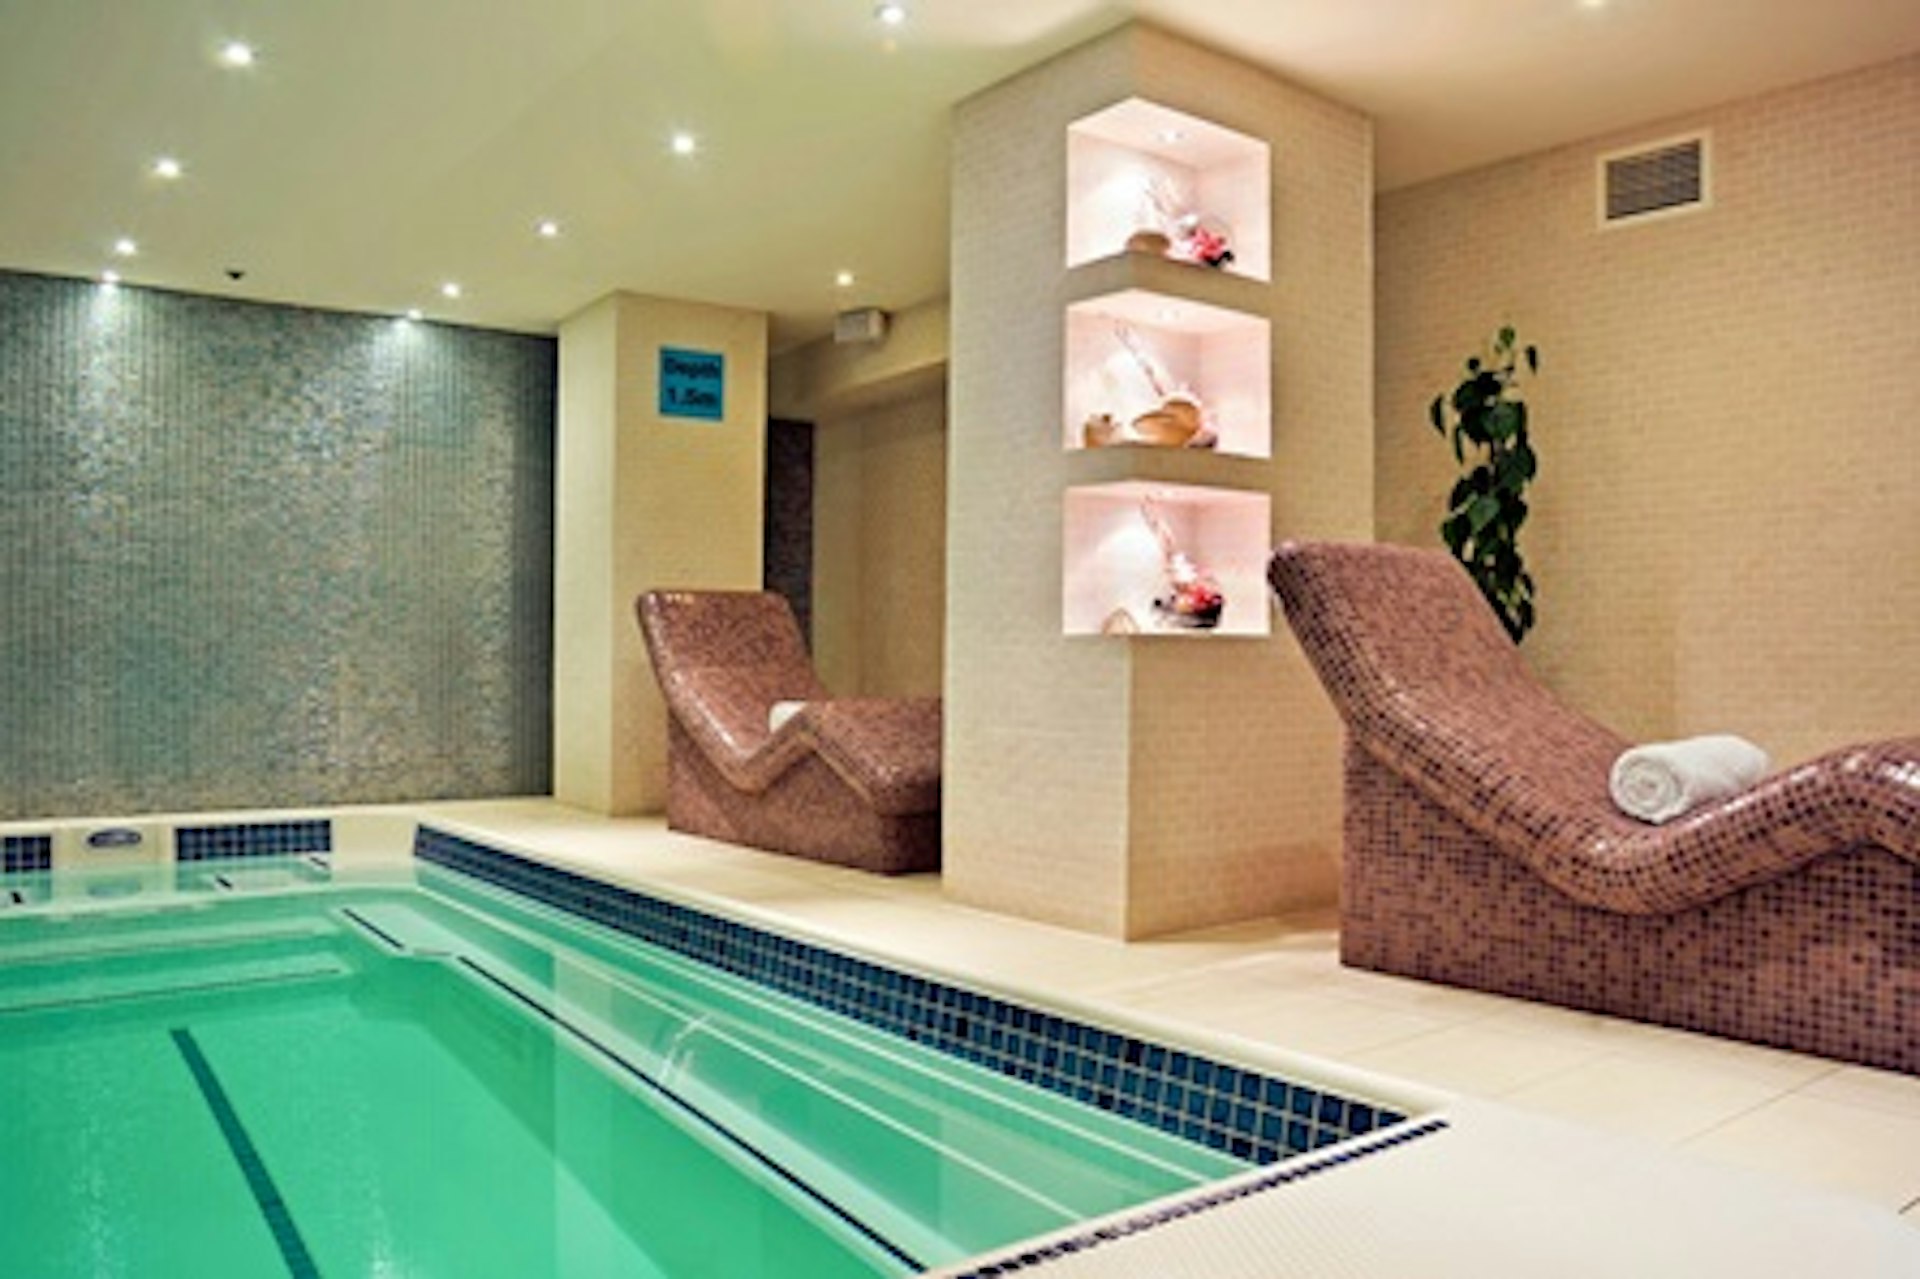 Weekday Spa Relaxation with Treatment and Prosecco at the 5* Montcalm Hotel, London 1